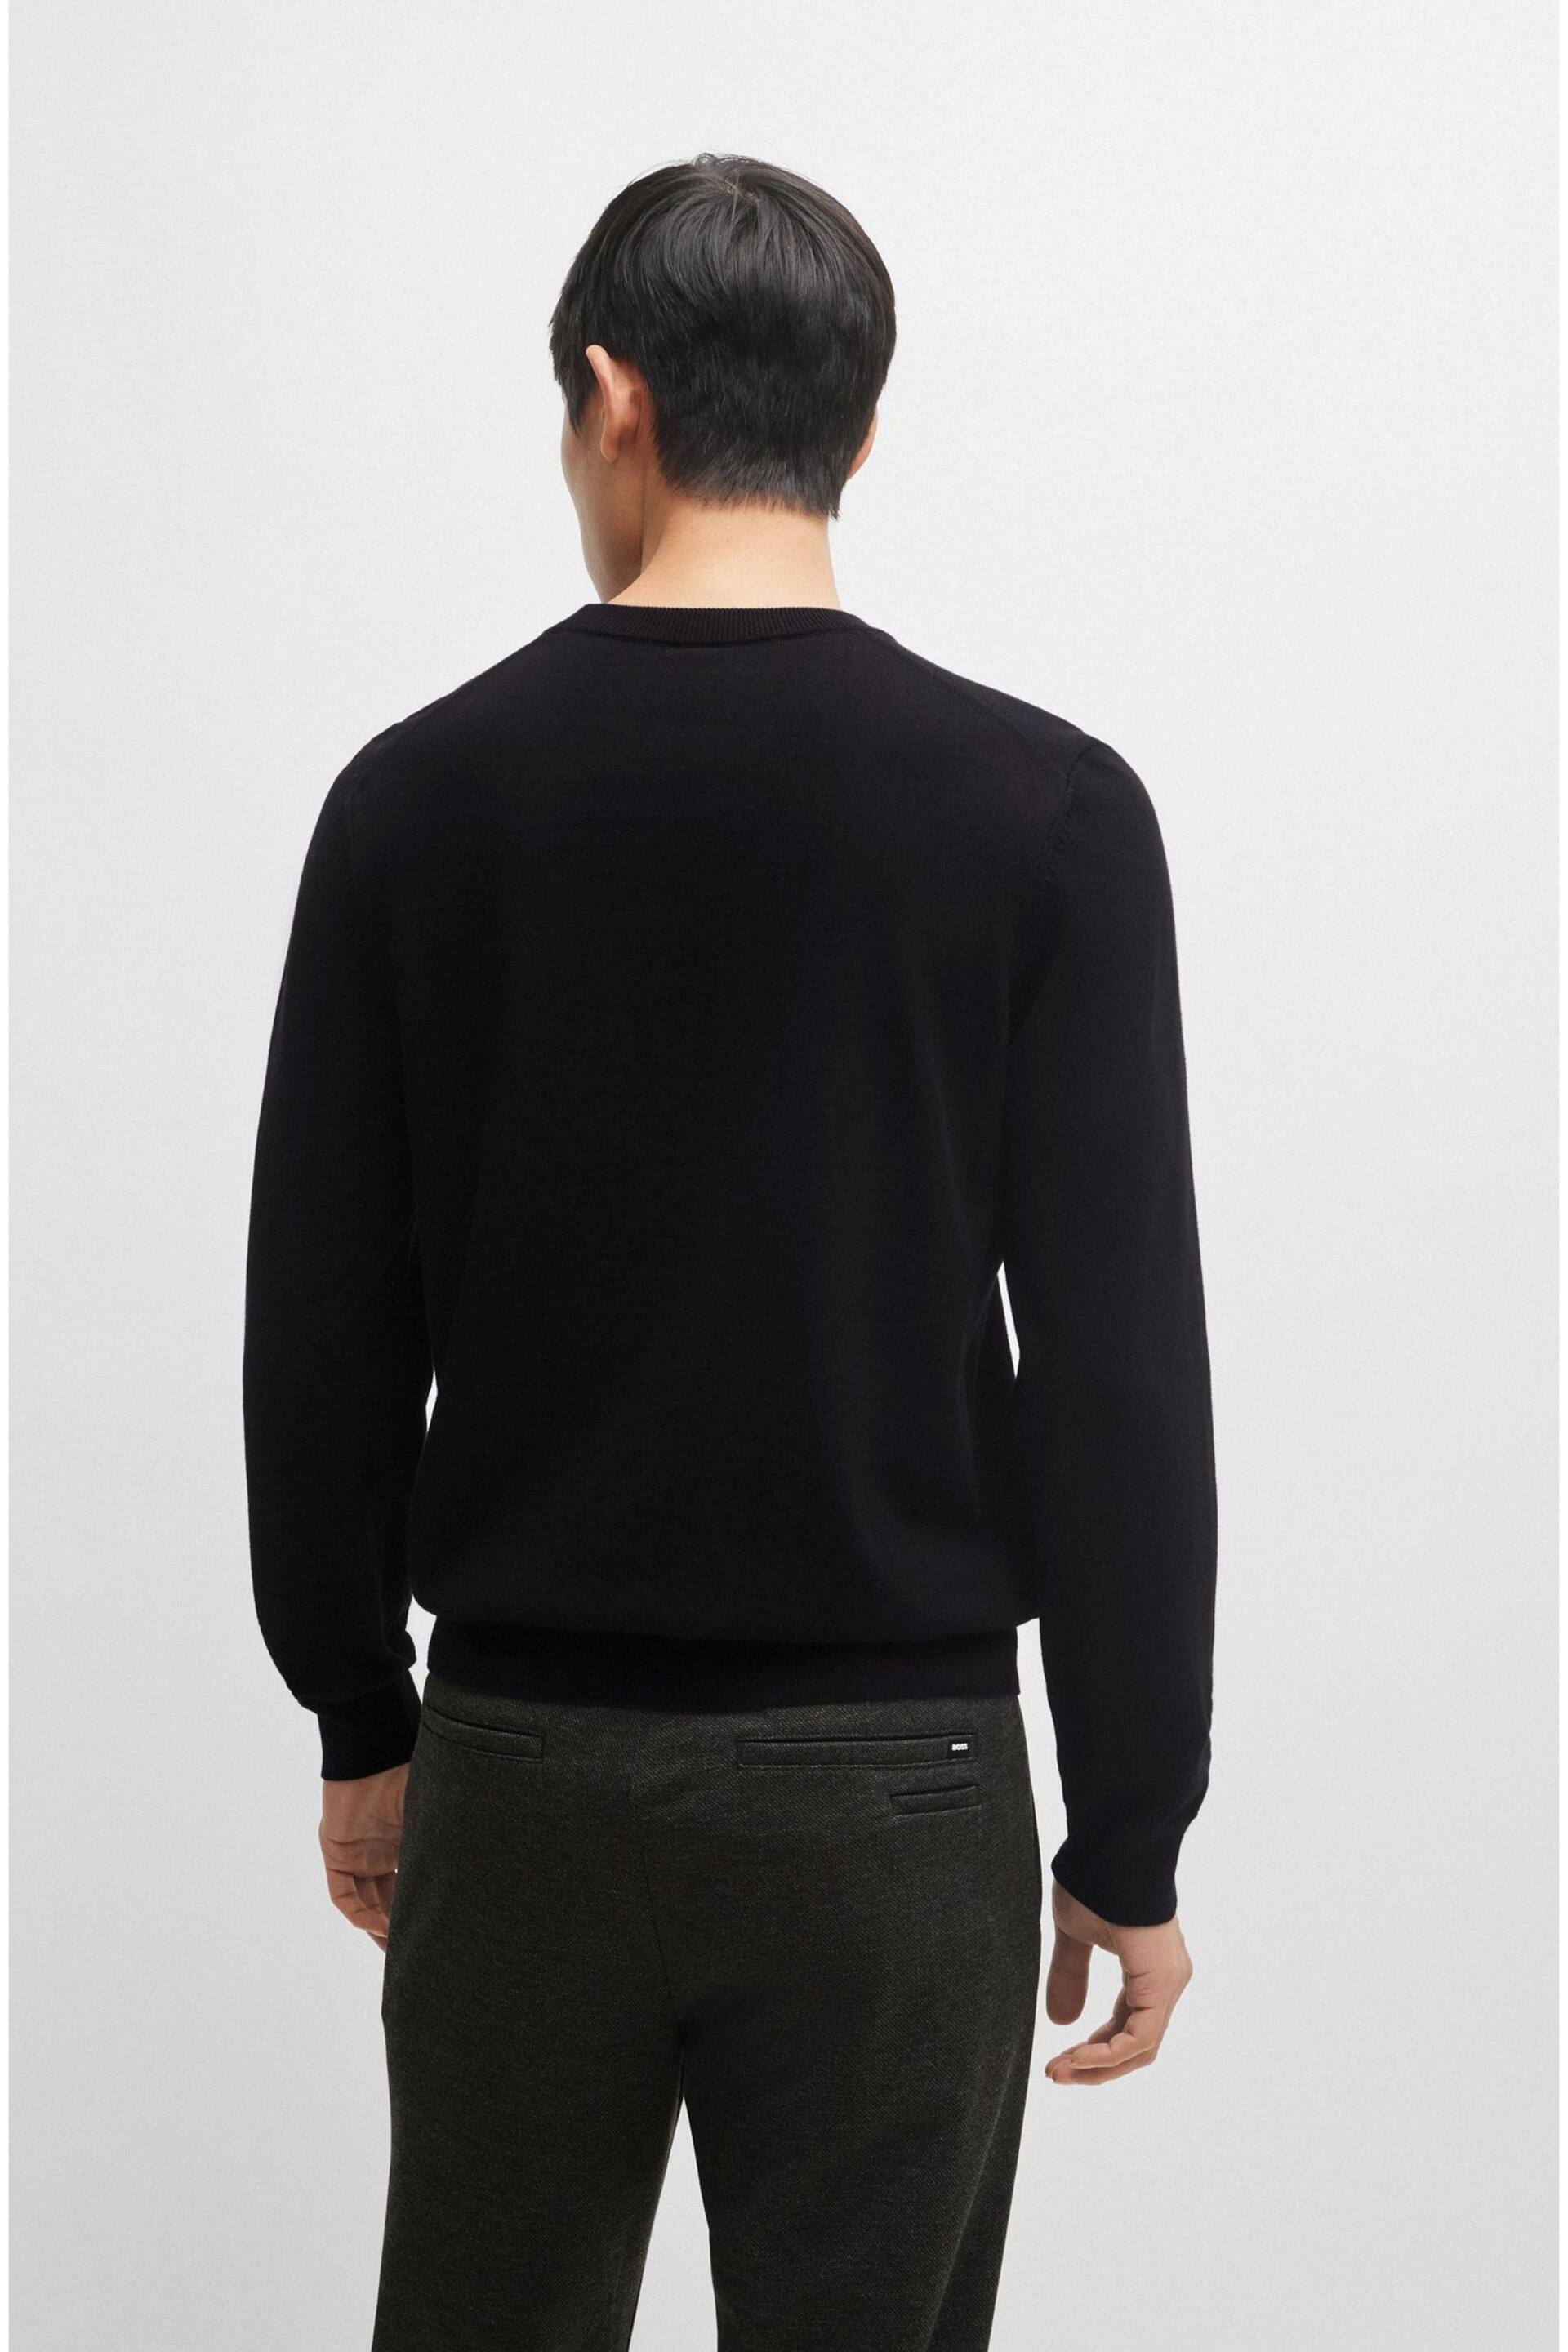 BOSS Black V-Neck Sweater in Cotton With Embroidered Logo - Image 2 of 5